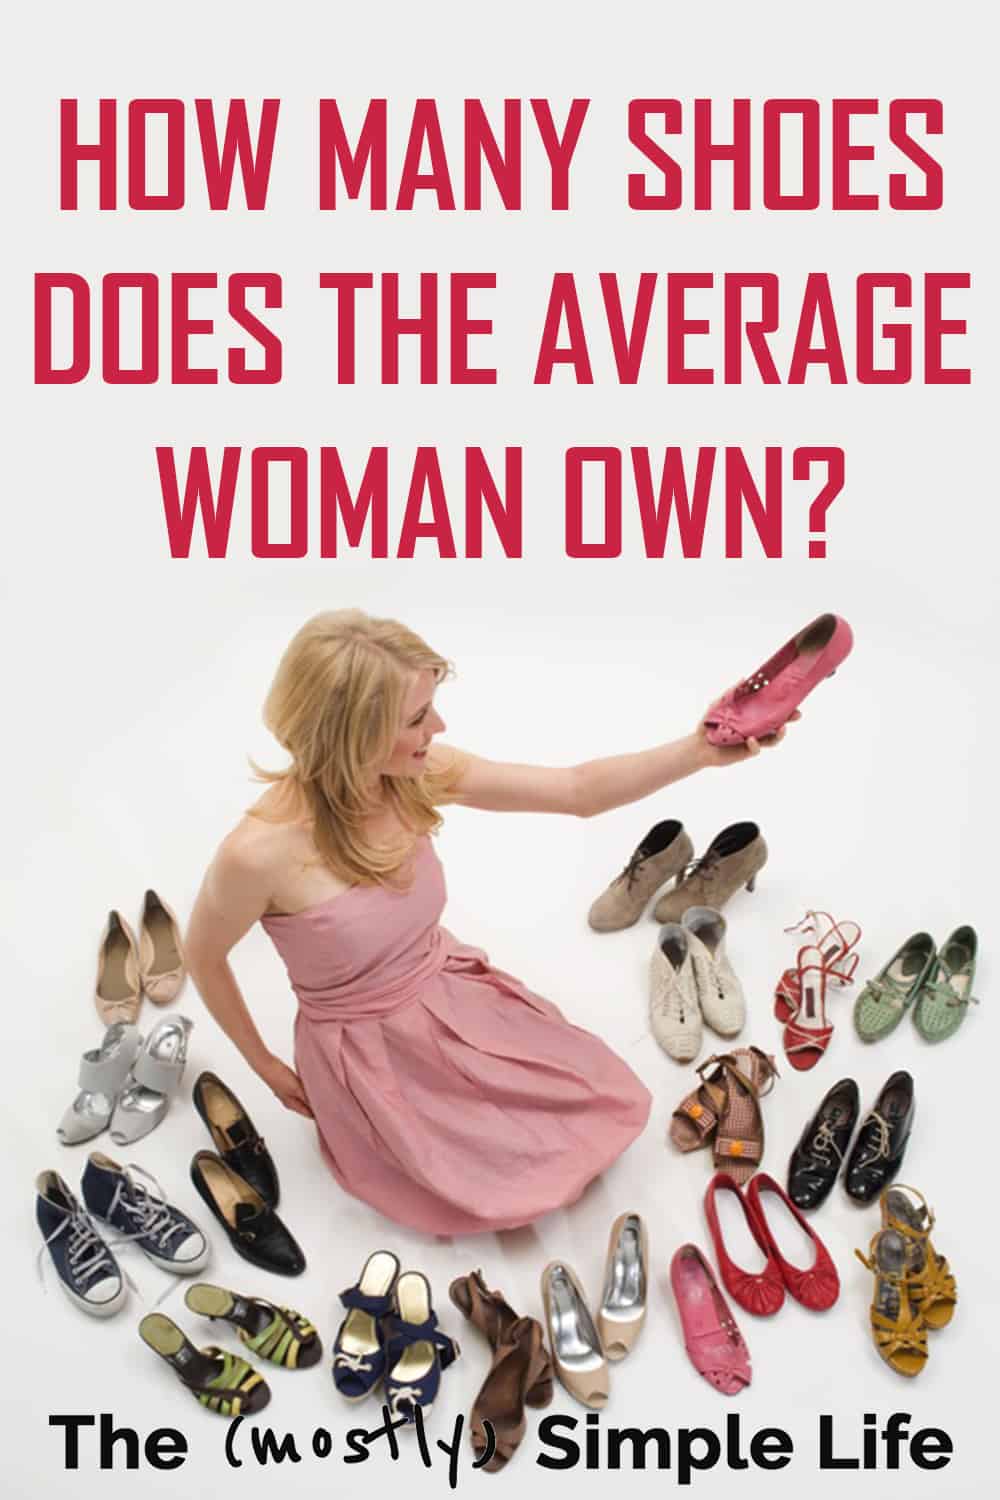 How Many Pairs of Shoes Does the Average Woman Own?